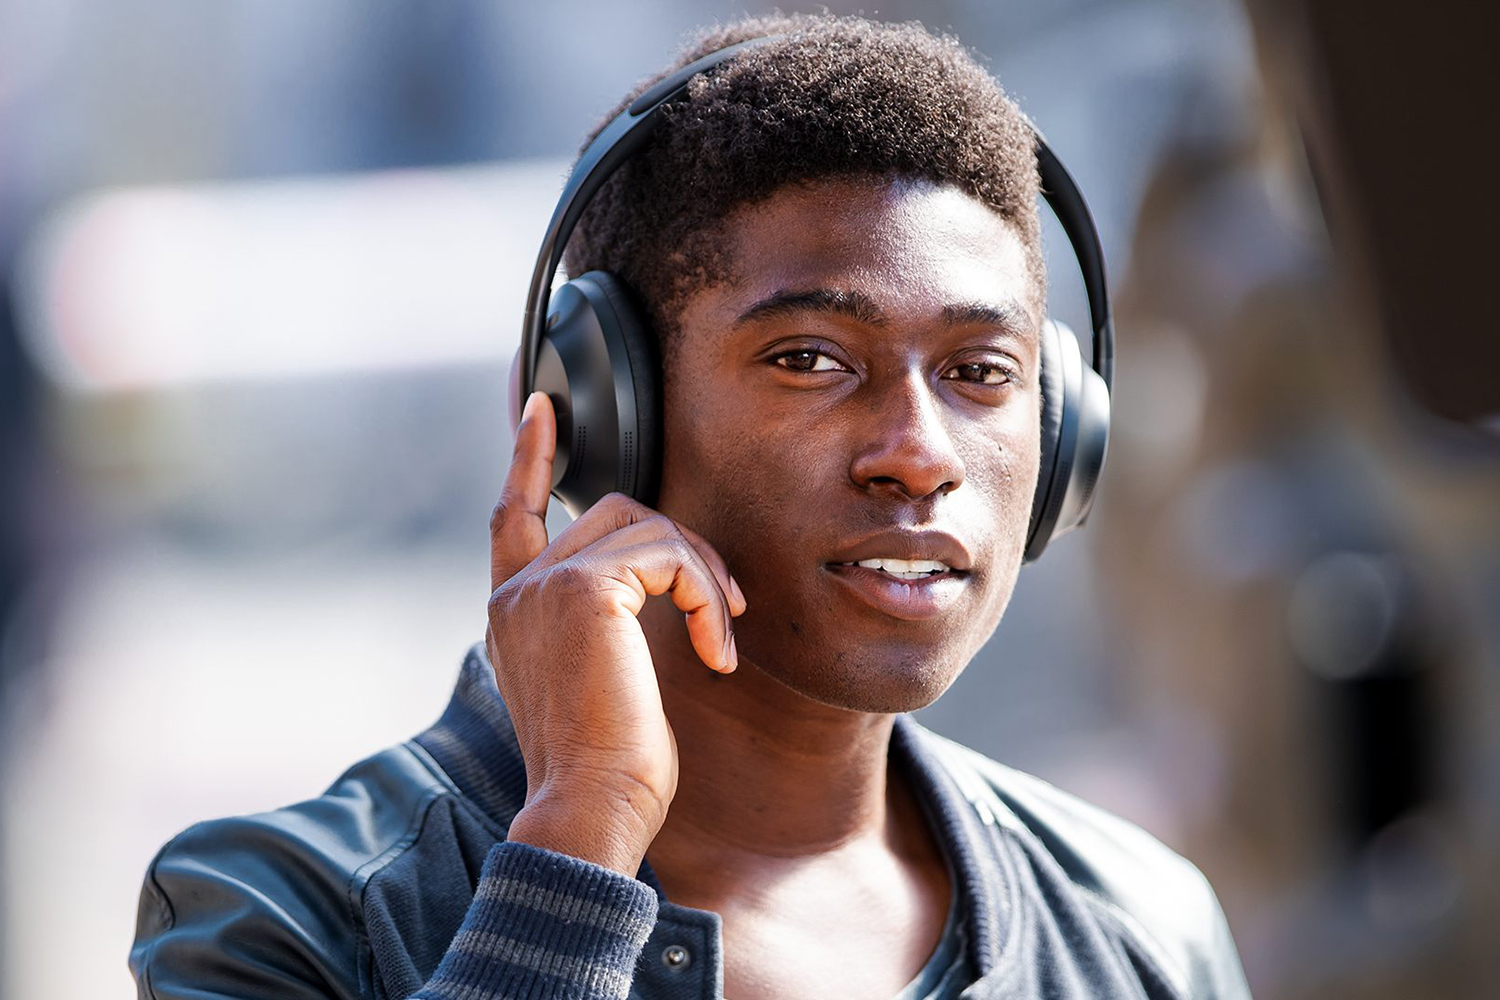 Bose's New Noise-Cancelling Headphones 700 Will be Great for